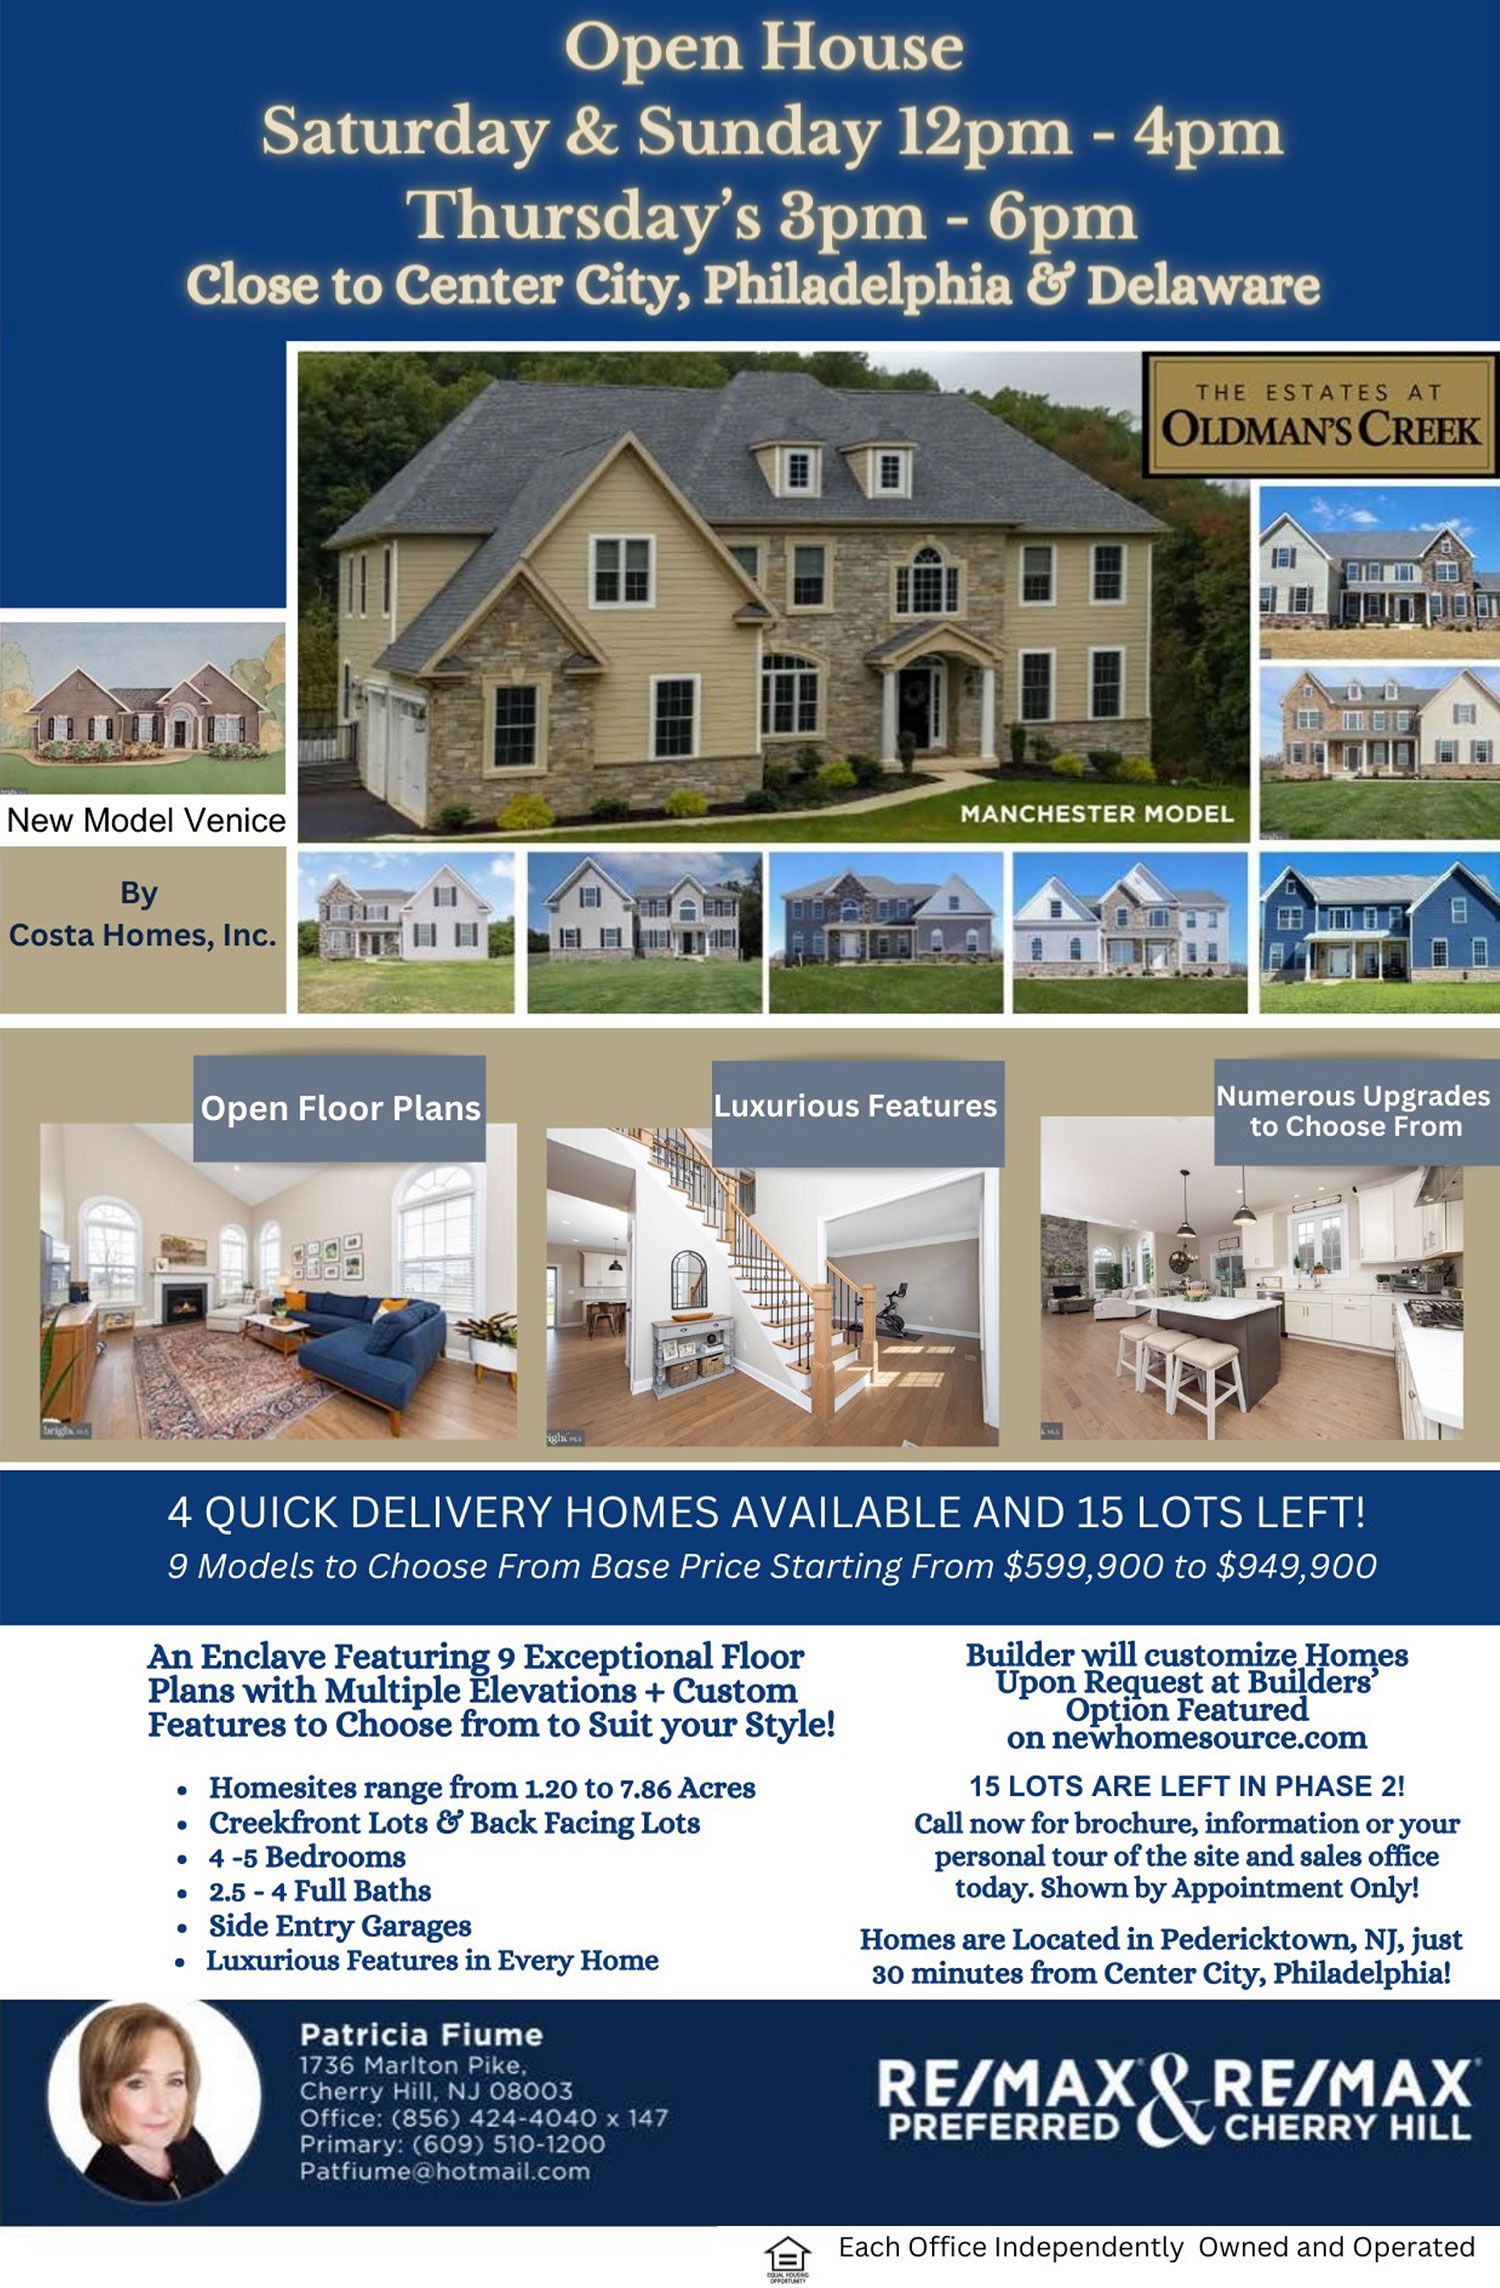 9 home models from $599,900 - $949,900 and Only 15 lots left